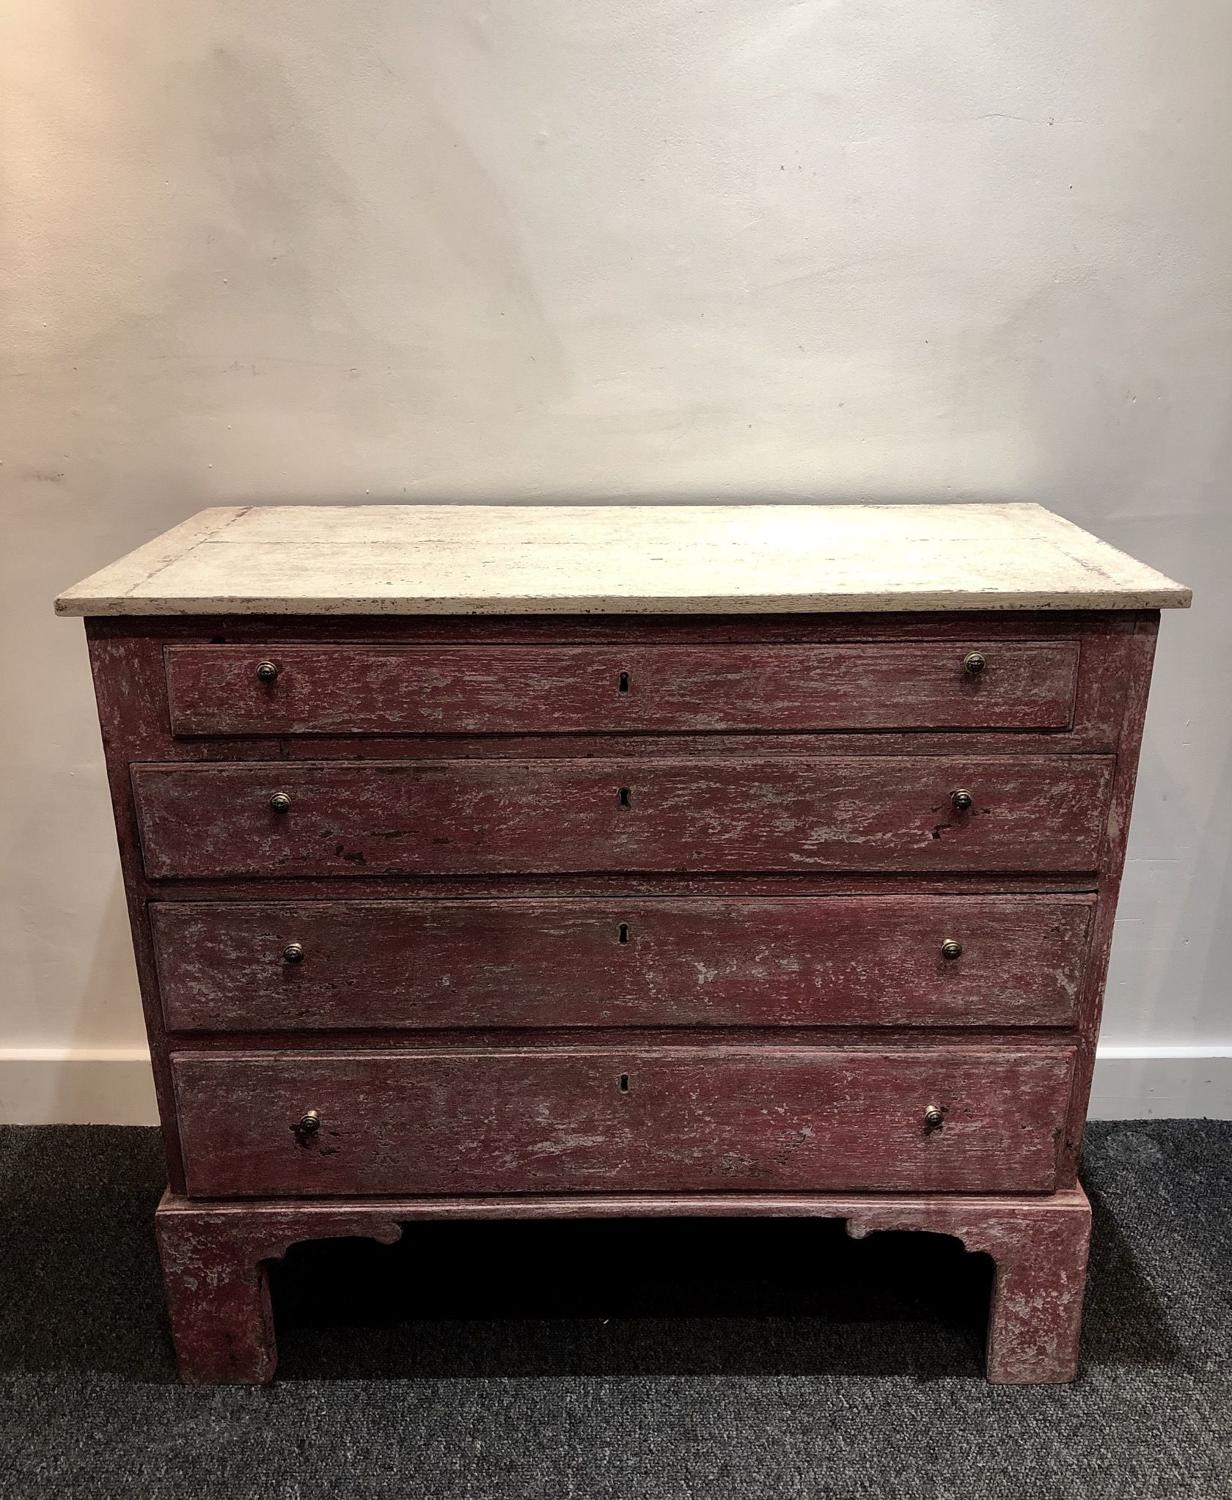 A petite painted commode